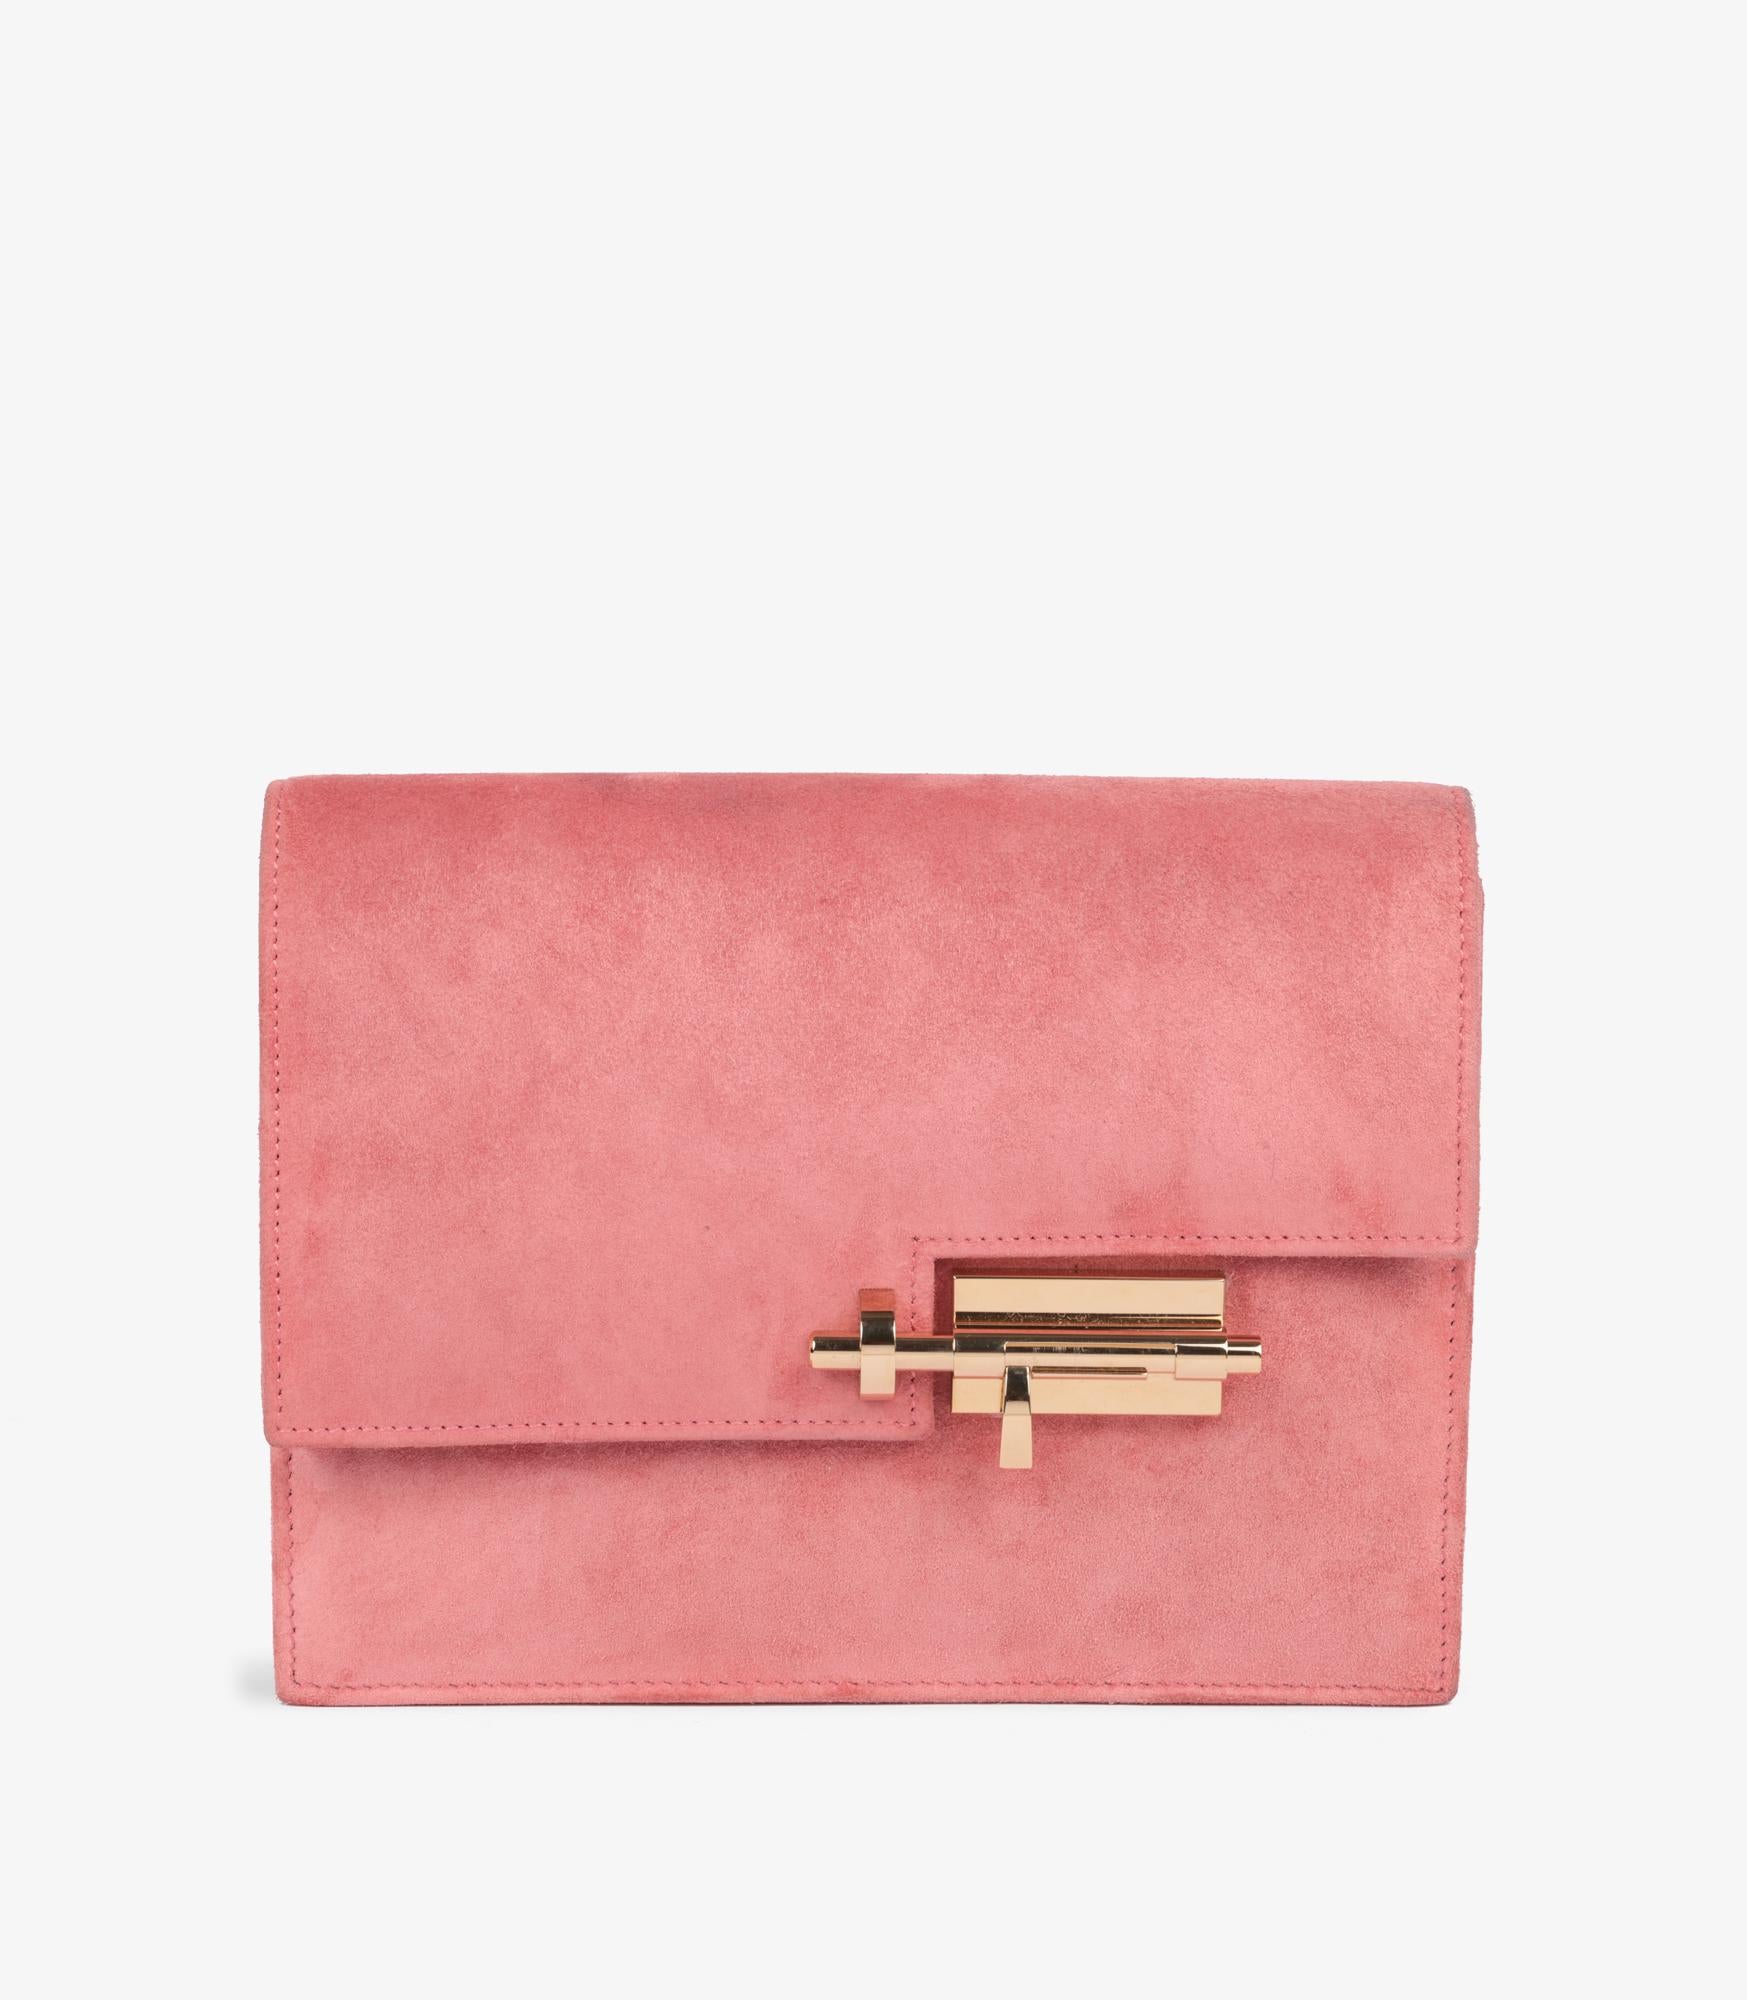 Hermès Rose Indienne Doblis Verrou Clutch

Brand- Hermès
Model- Verrou Clutch
Product Type- Clutch
Serial Number- T
Age- Circa 2015
Accompanied By- Hermès Dust Bag, Protective Felt
Colour- Rose Indienne
Hardware- Gold 
Material(s)-